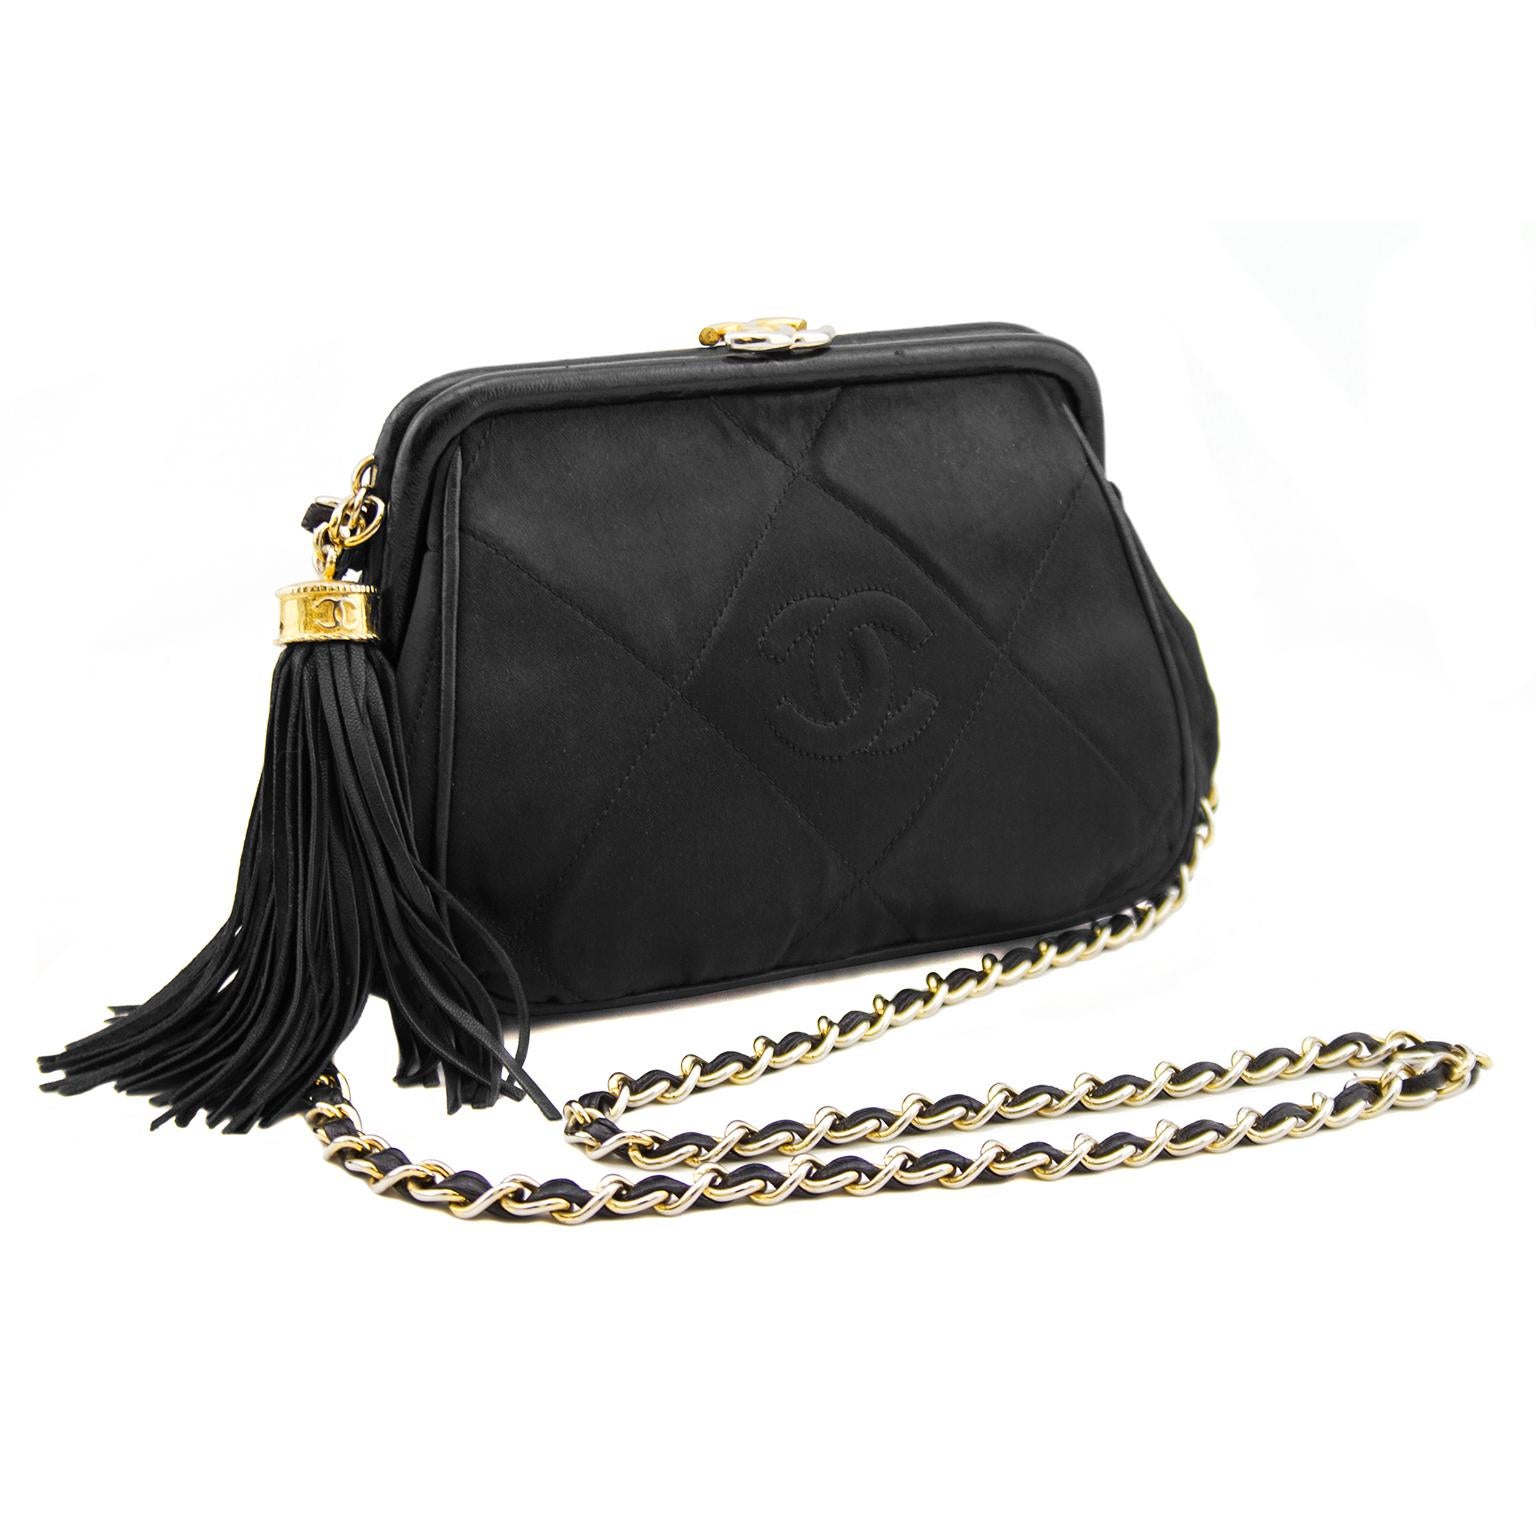 This sweet little bag is crafted of beautiful black diamond quilted silk with a CC logo on the front and leather tassel embellishment. Featuring a braided shoulder chain and frame made out of leather. This opens with a gold CC snap closure to a red